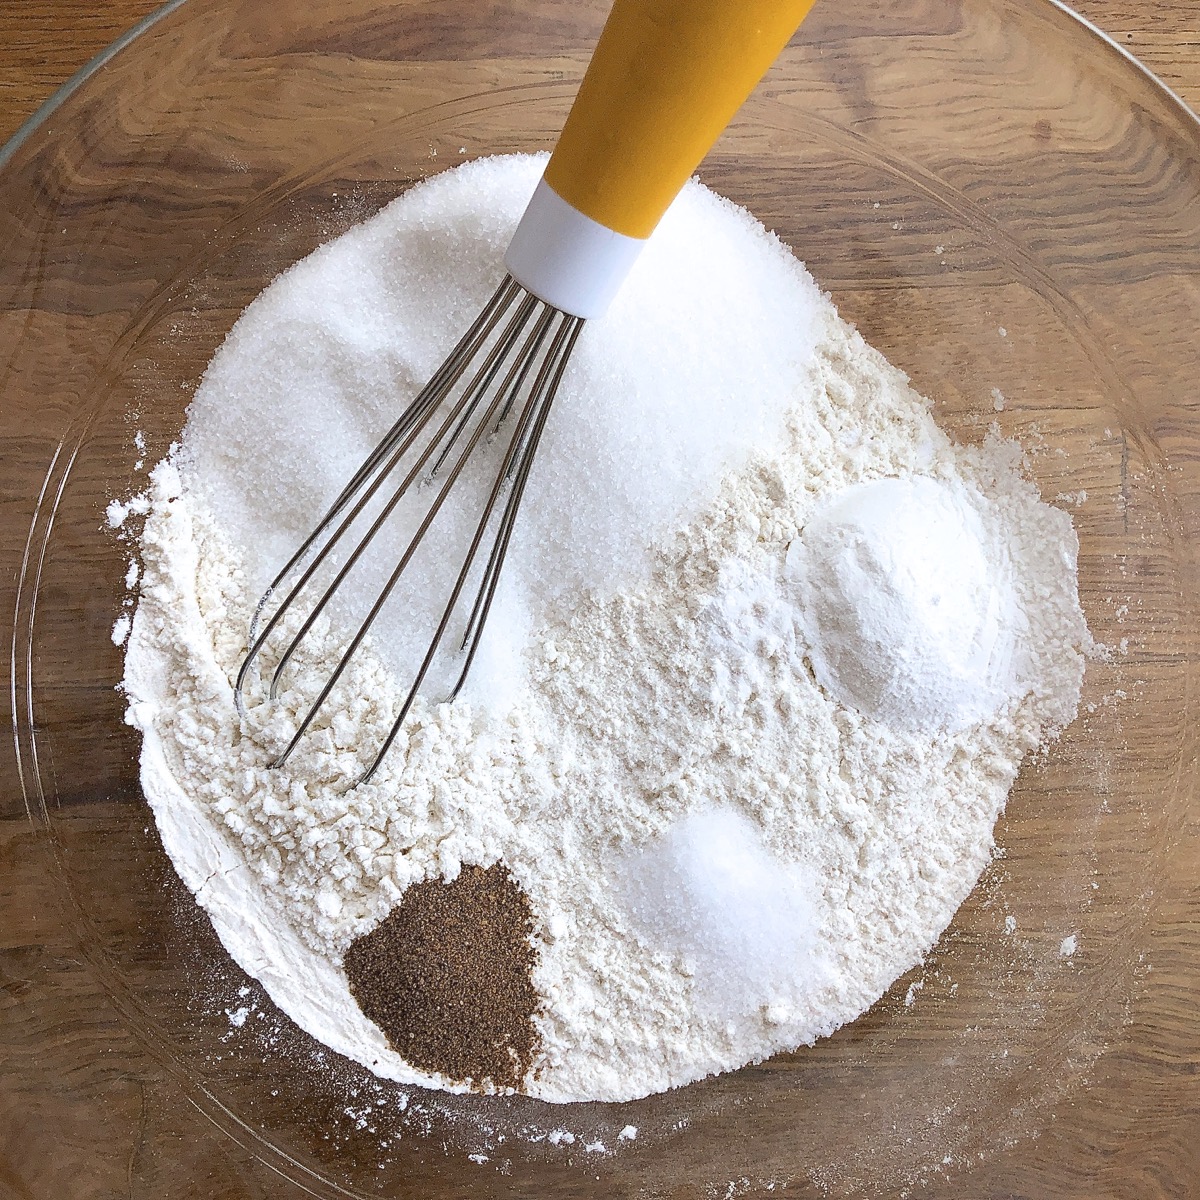 Flour, salt, sugar, baking powder, and nutmeg in a mixing bowl, ready to be whisked together.